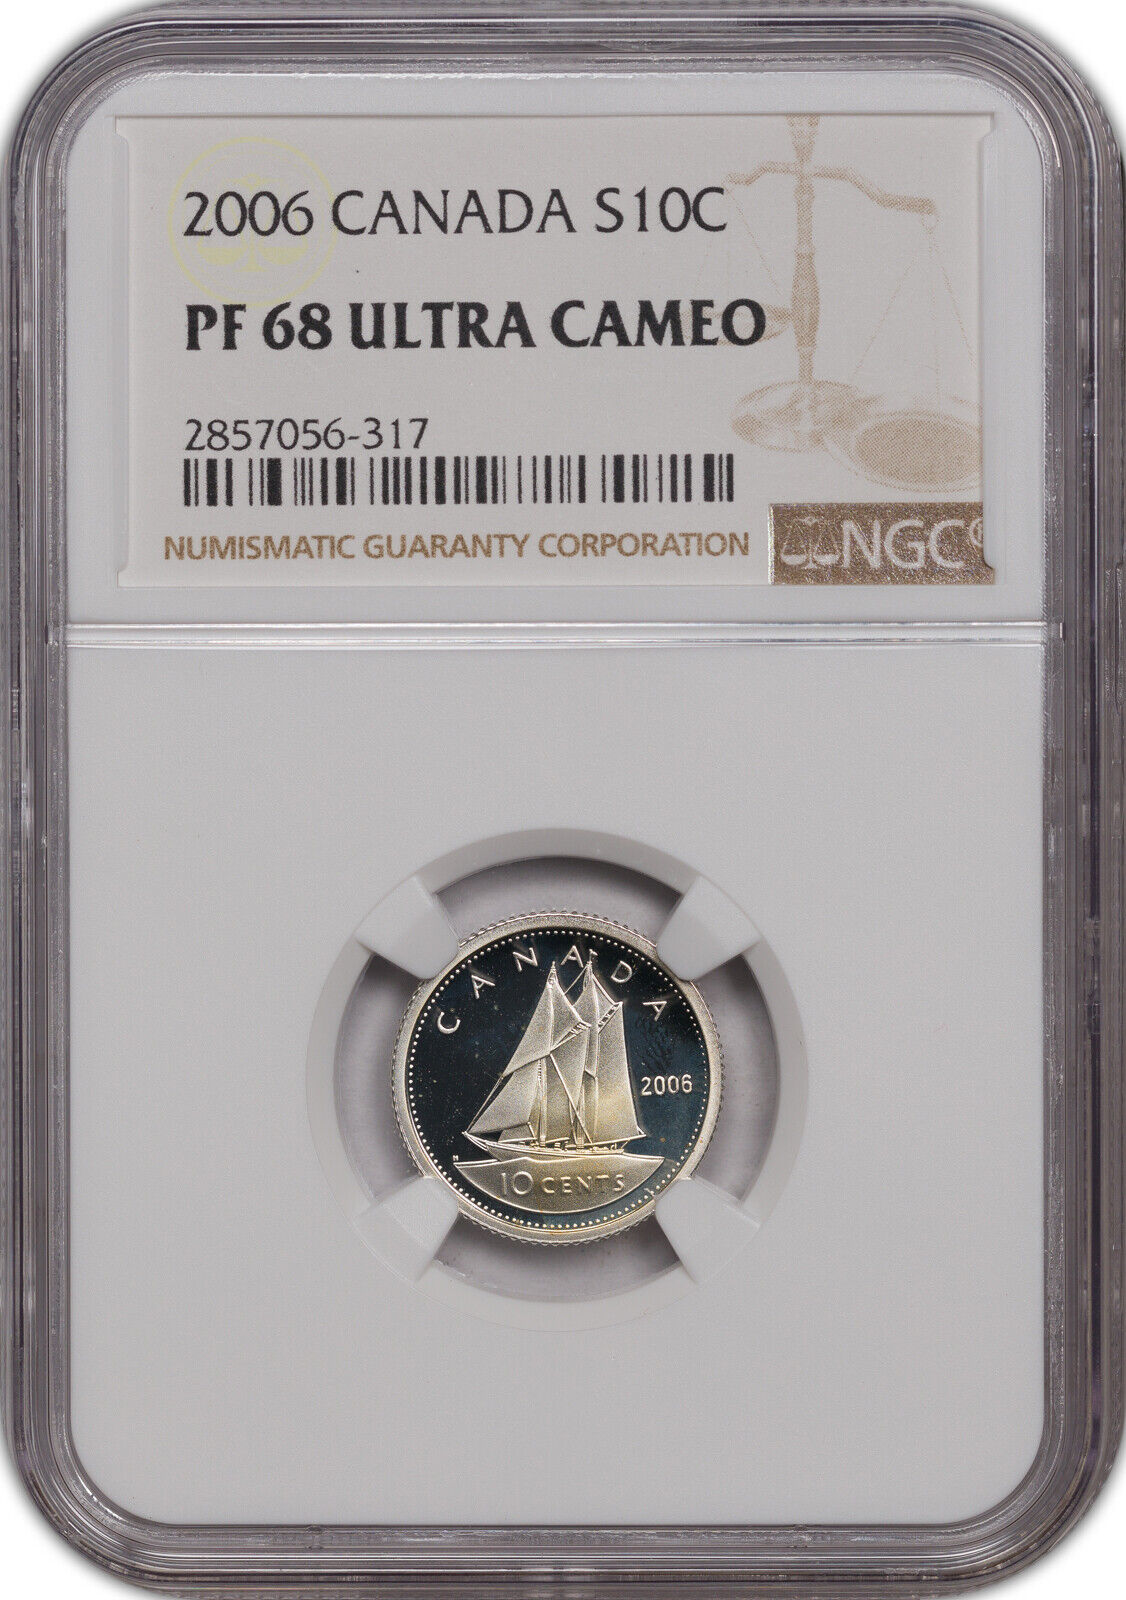 2006 Canada Silver 10 Cent Pf 68 Ultra Cameo Ngc Certified Coin